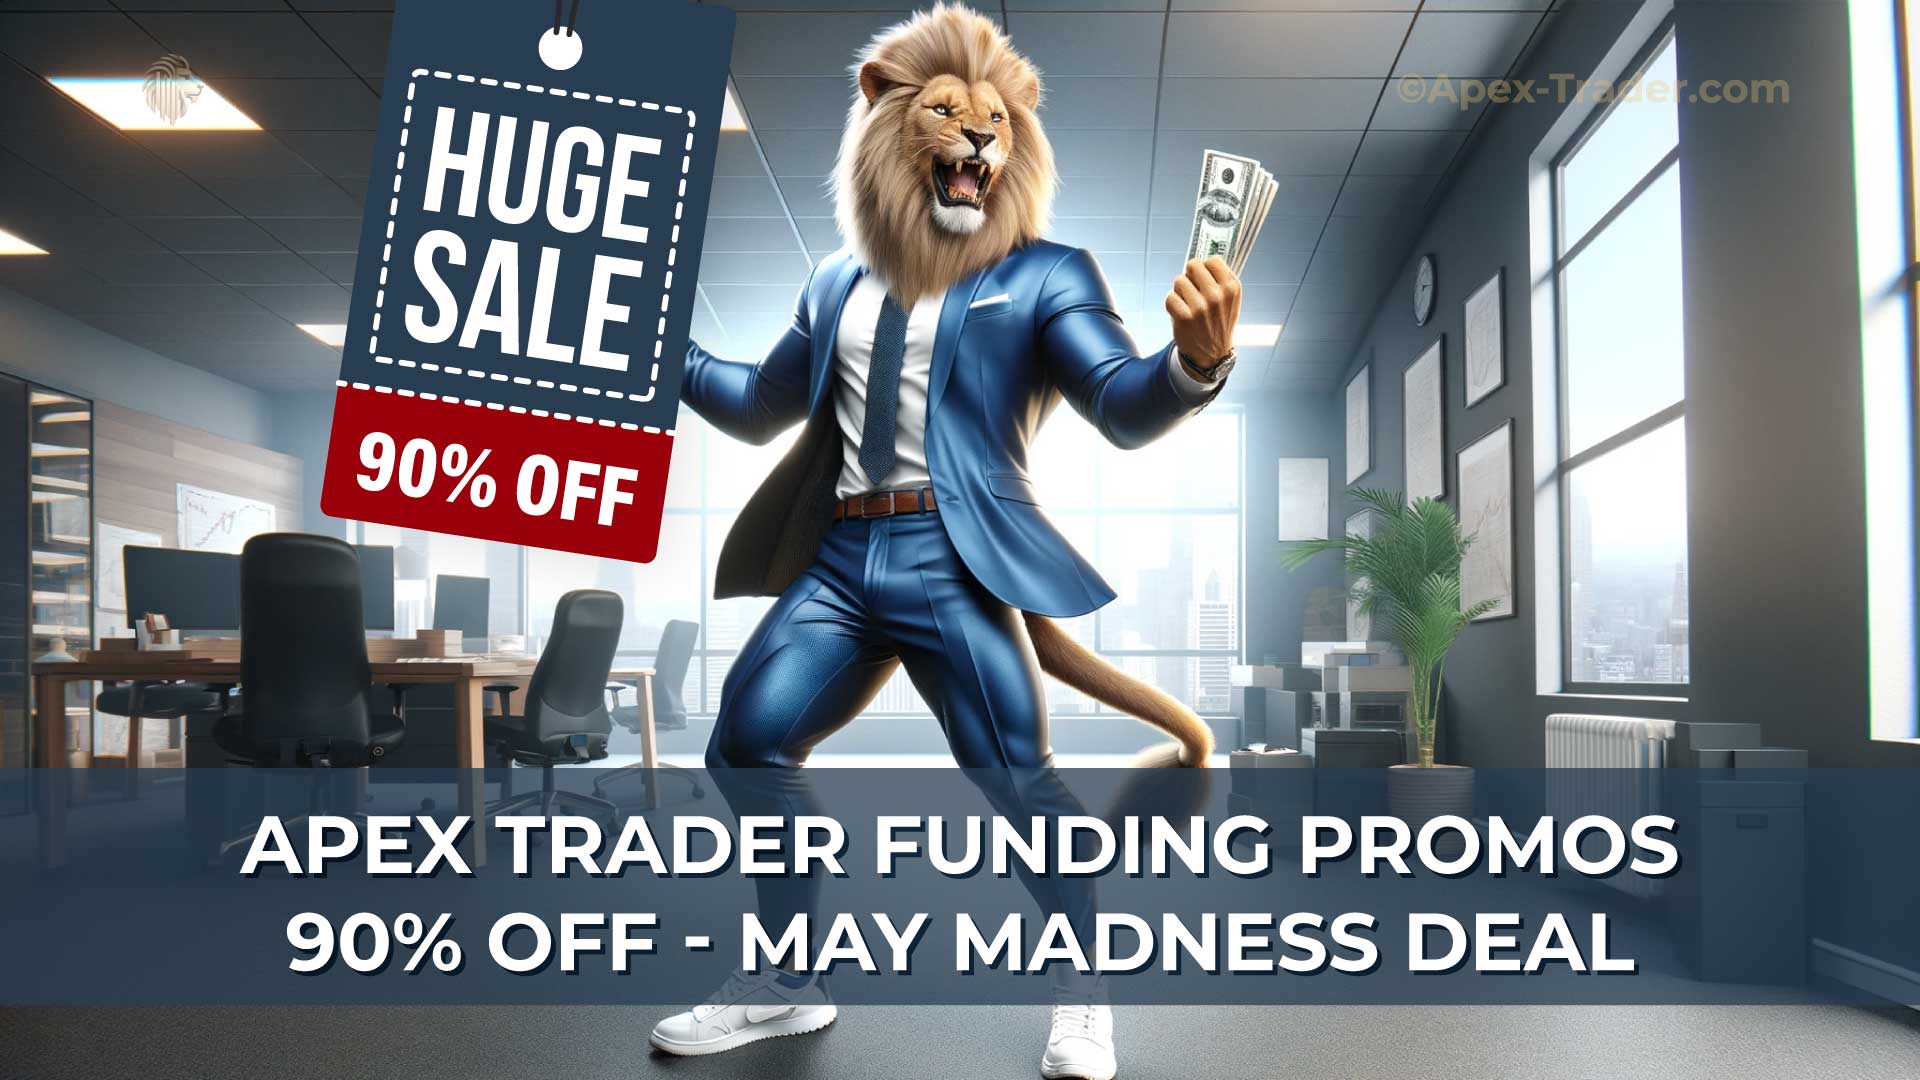 Apex-Trader-Promo-90%-Off-May-Madness-Deal-on-Apex-Trader-Website